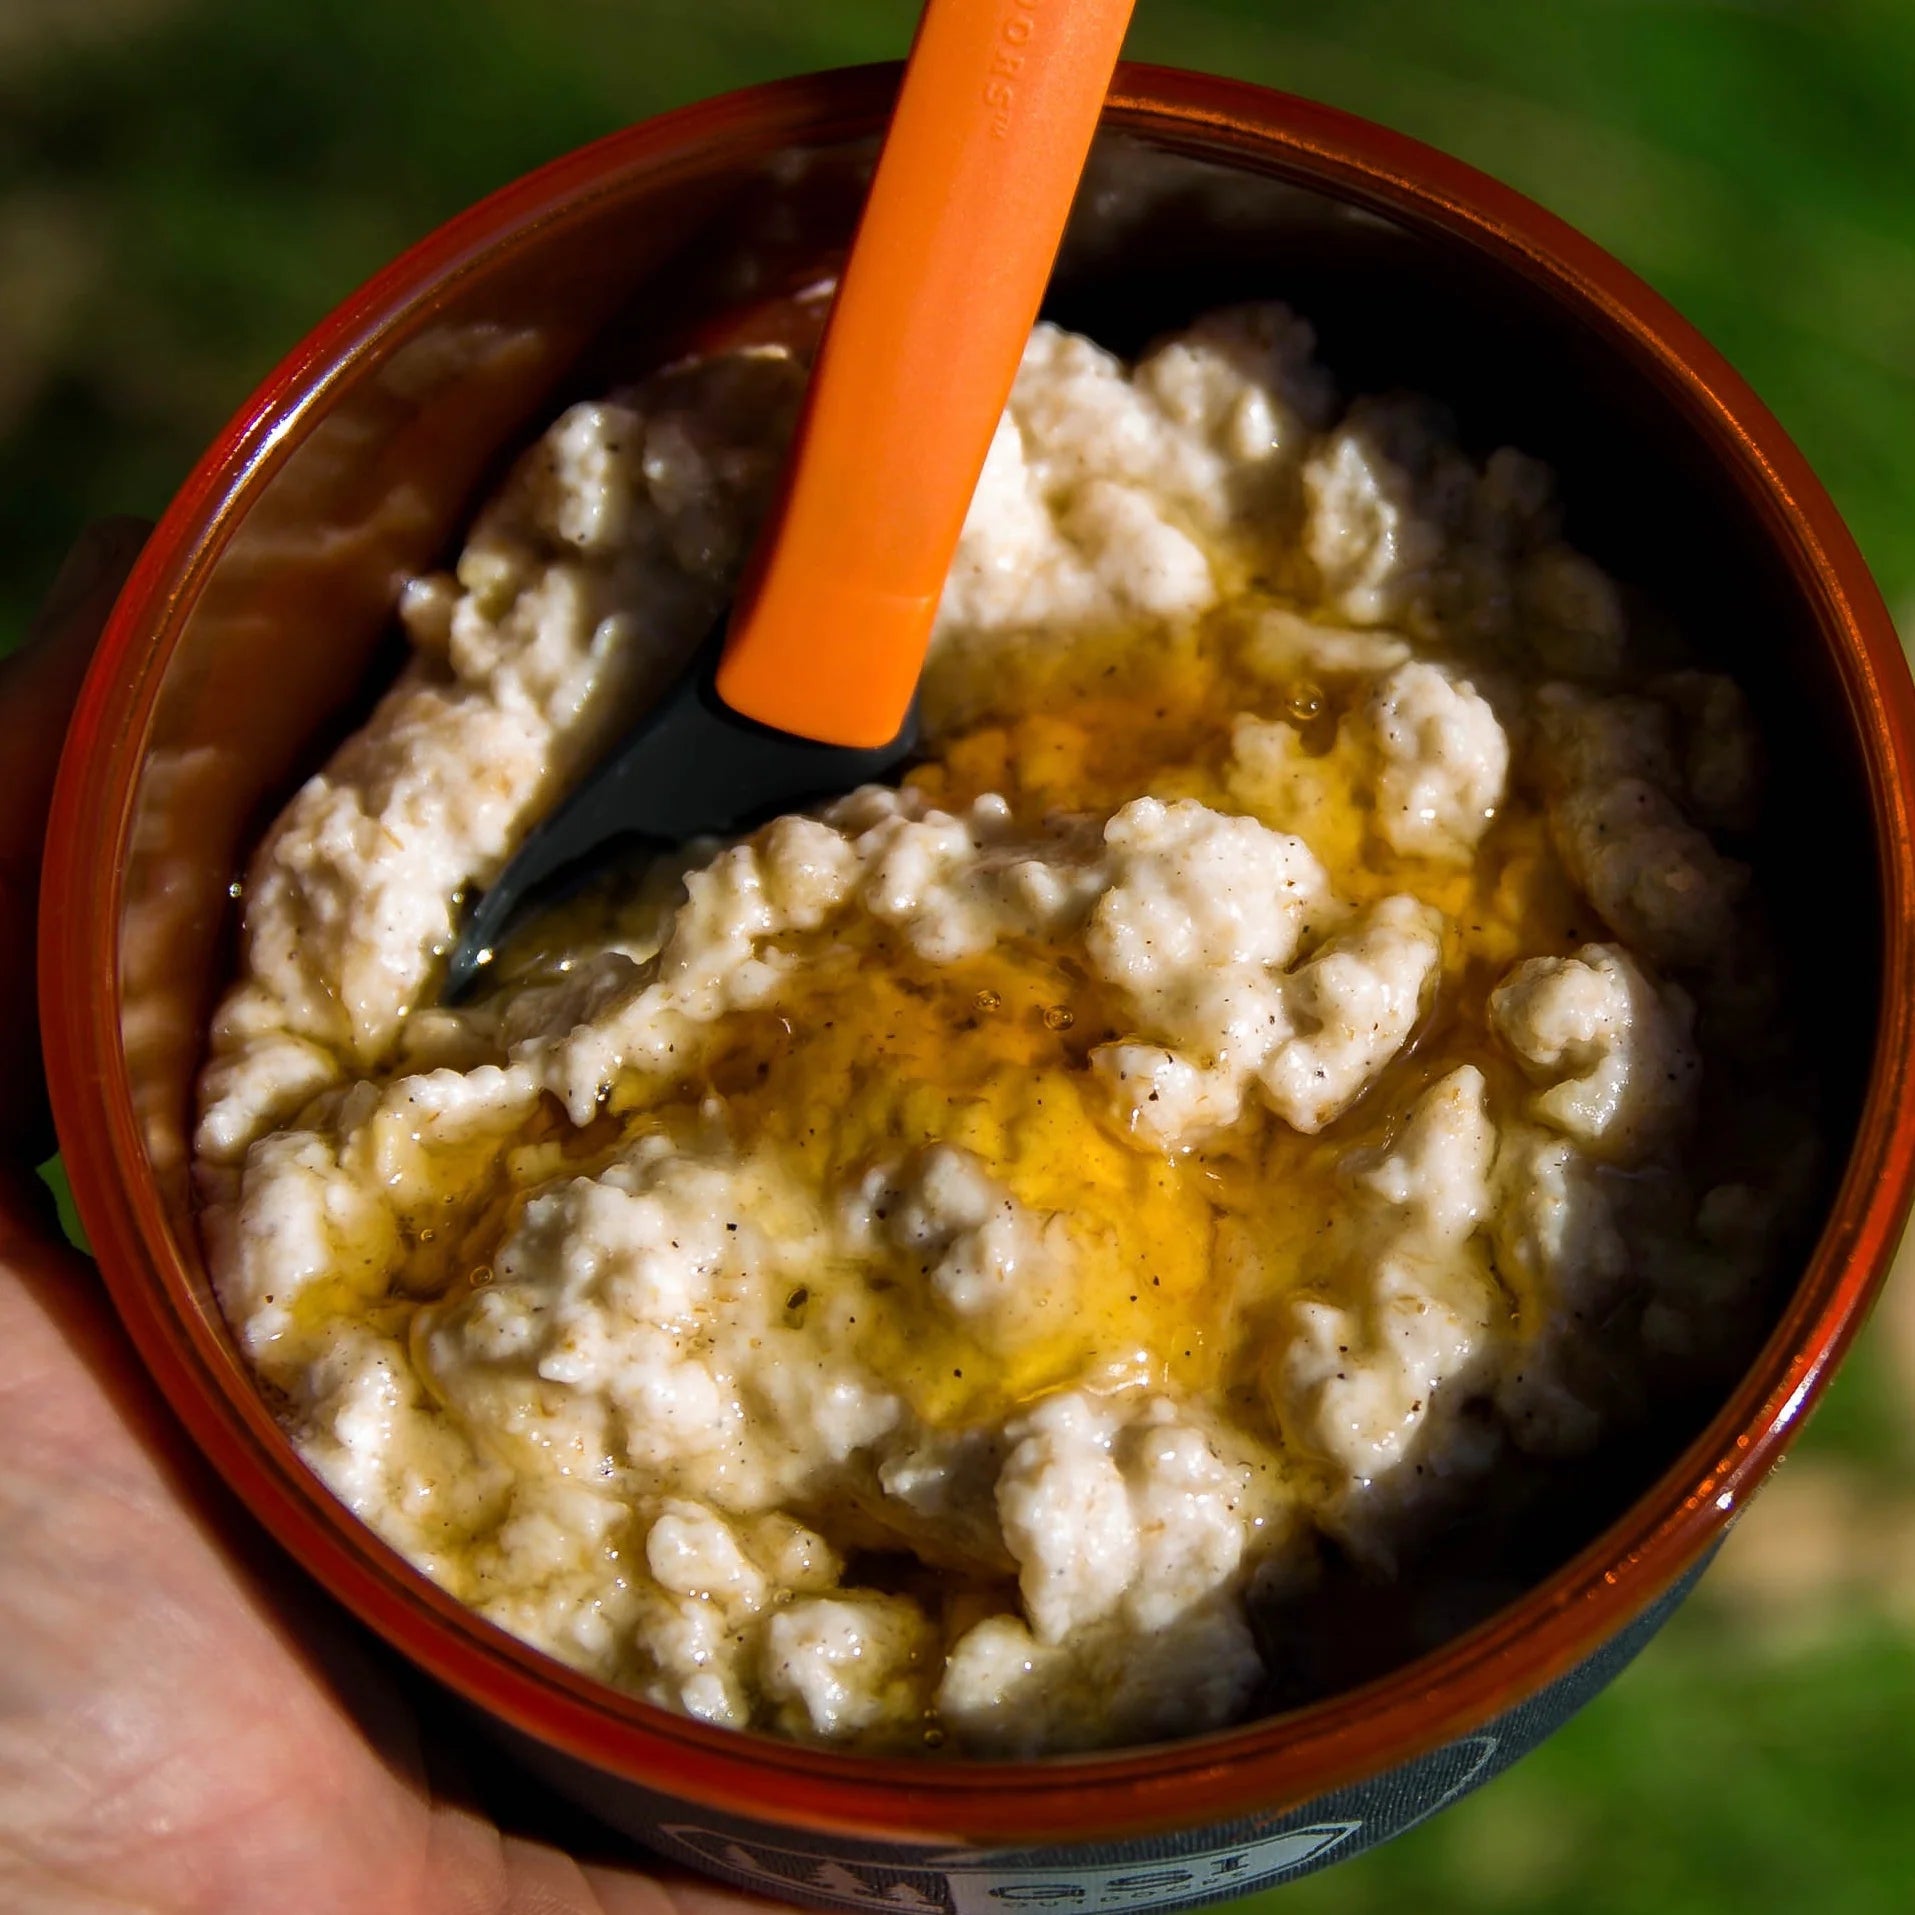 Campers Pantry Oats with Apple & Cinnamon